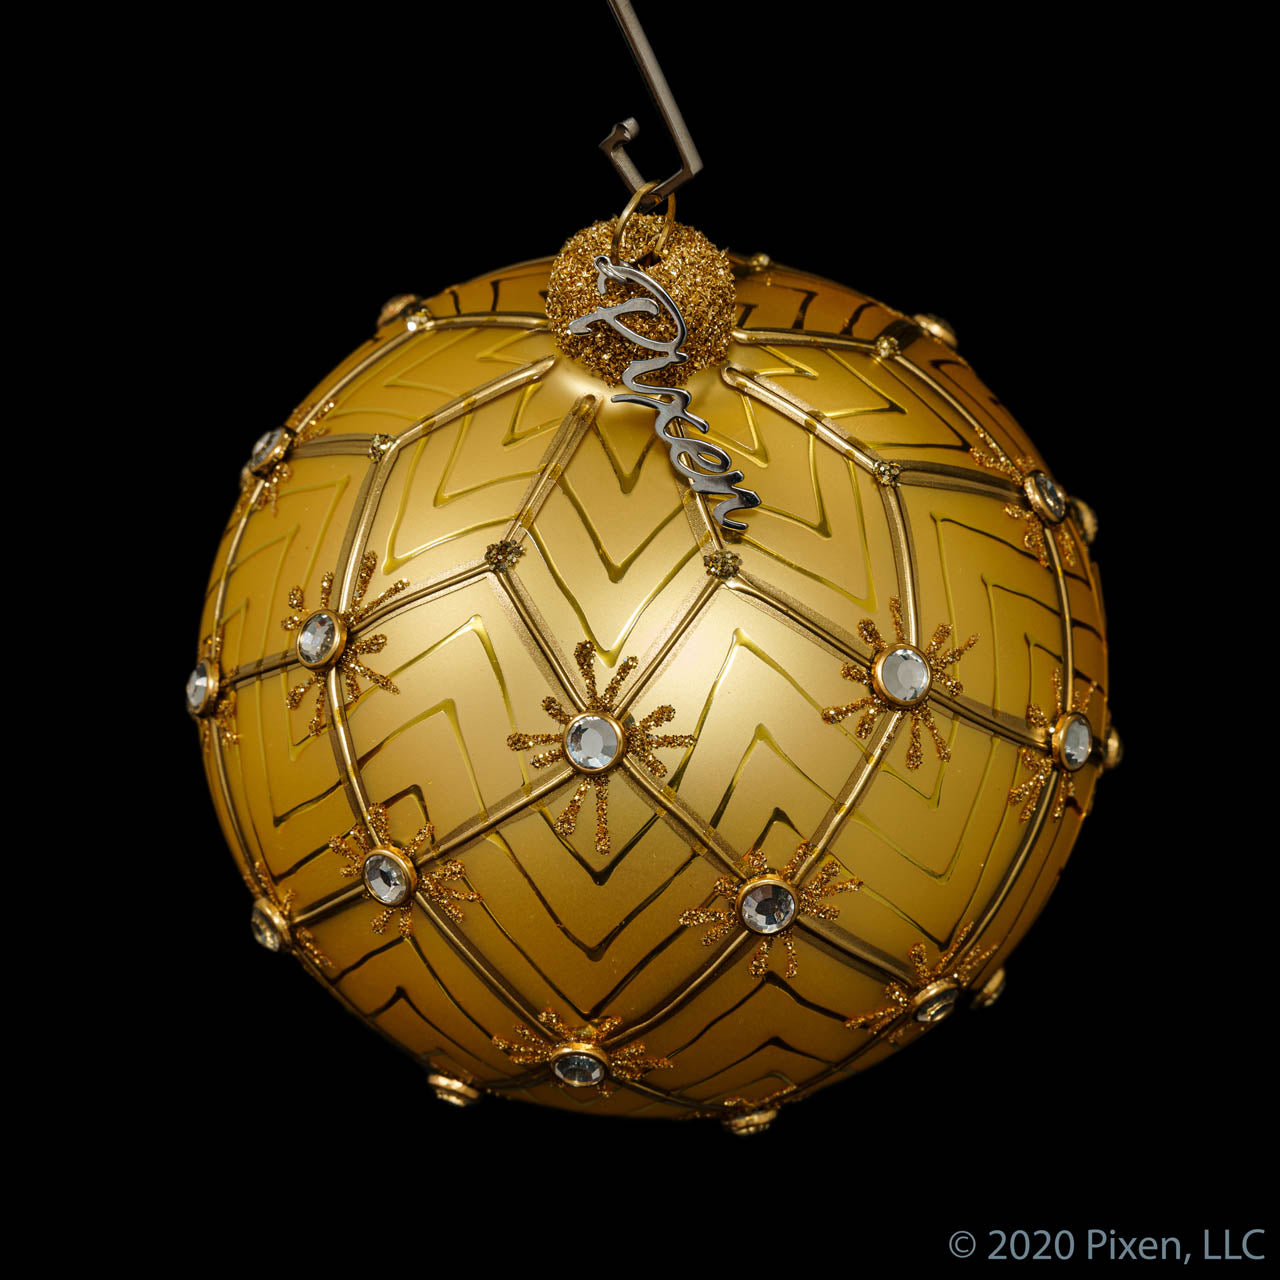 Sol Glass Christmas Ornament by Pixen